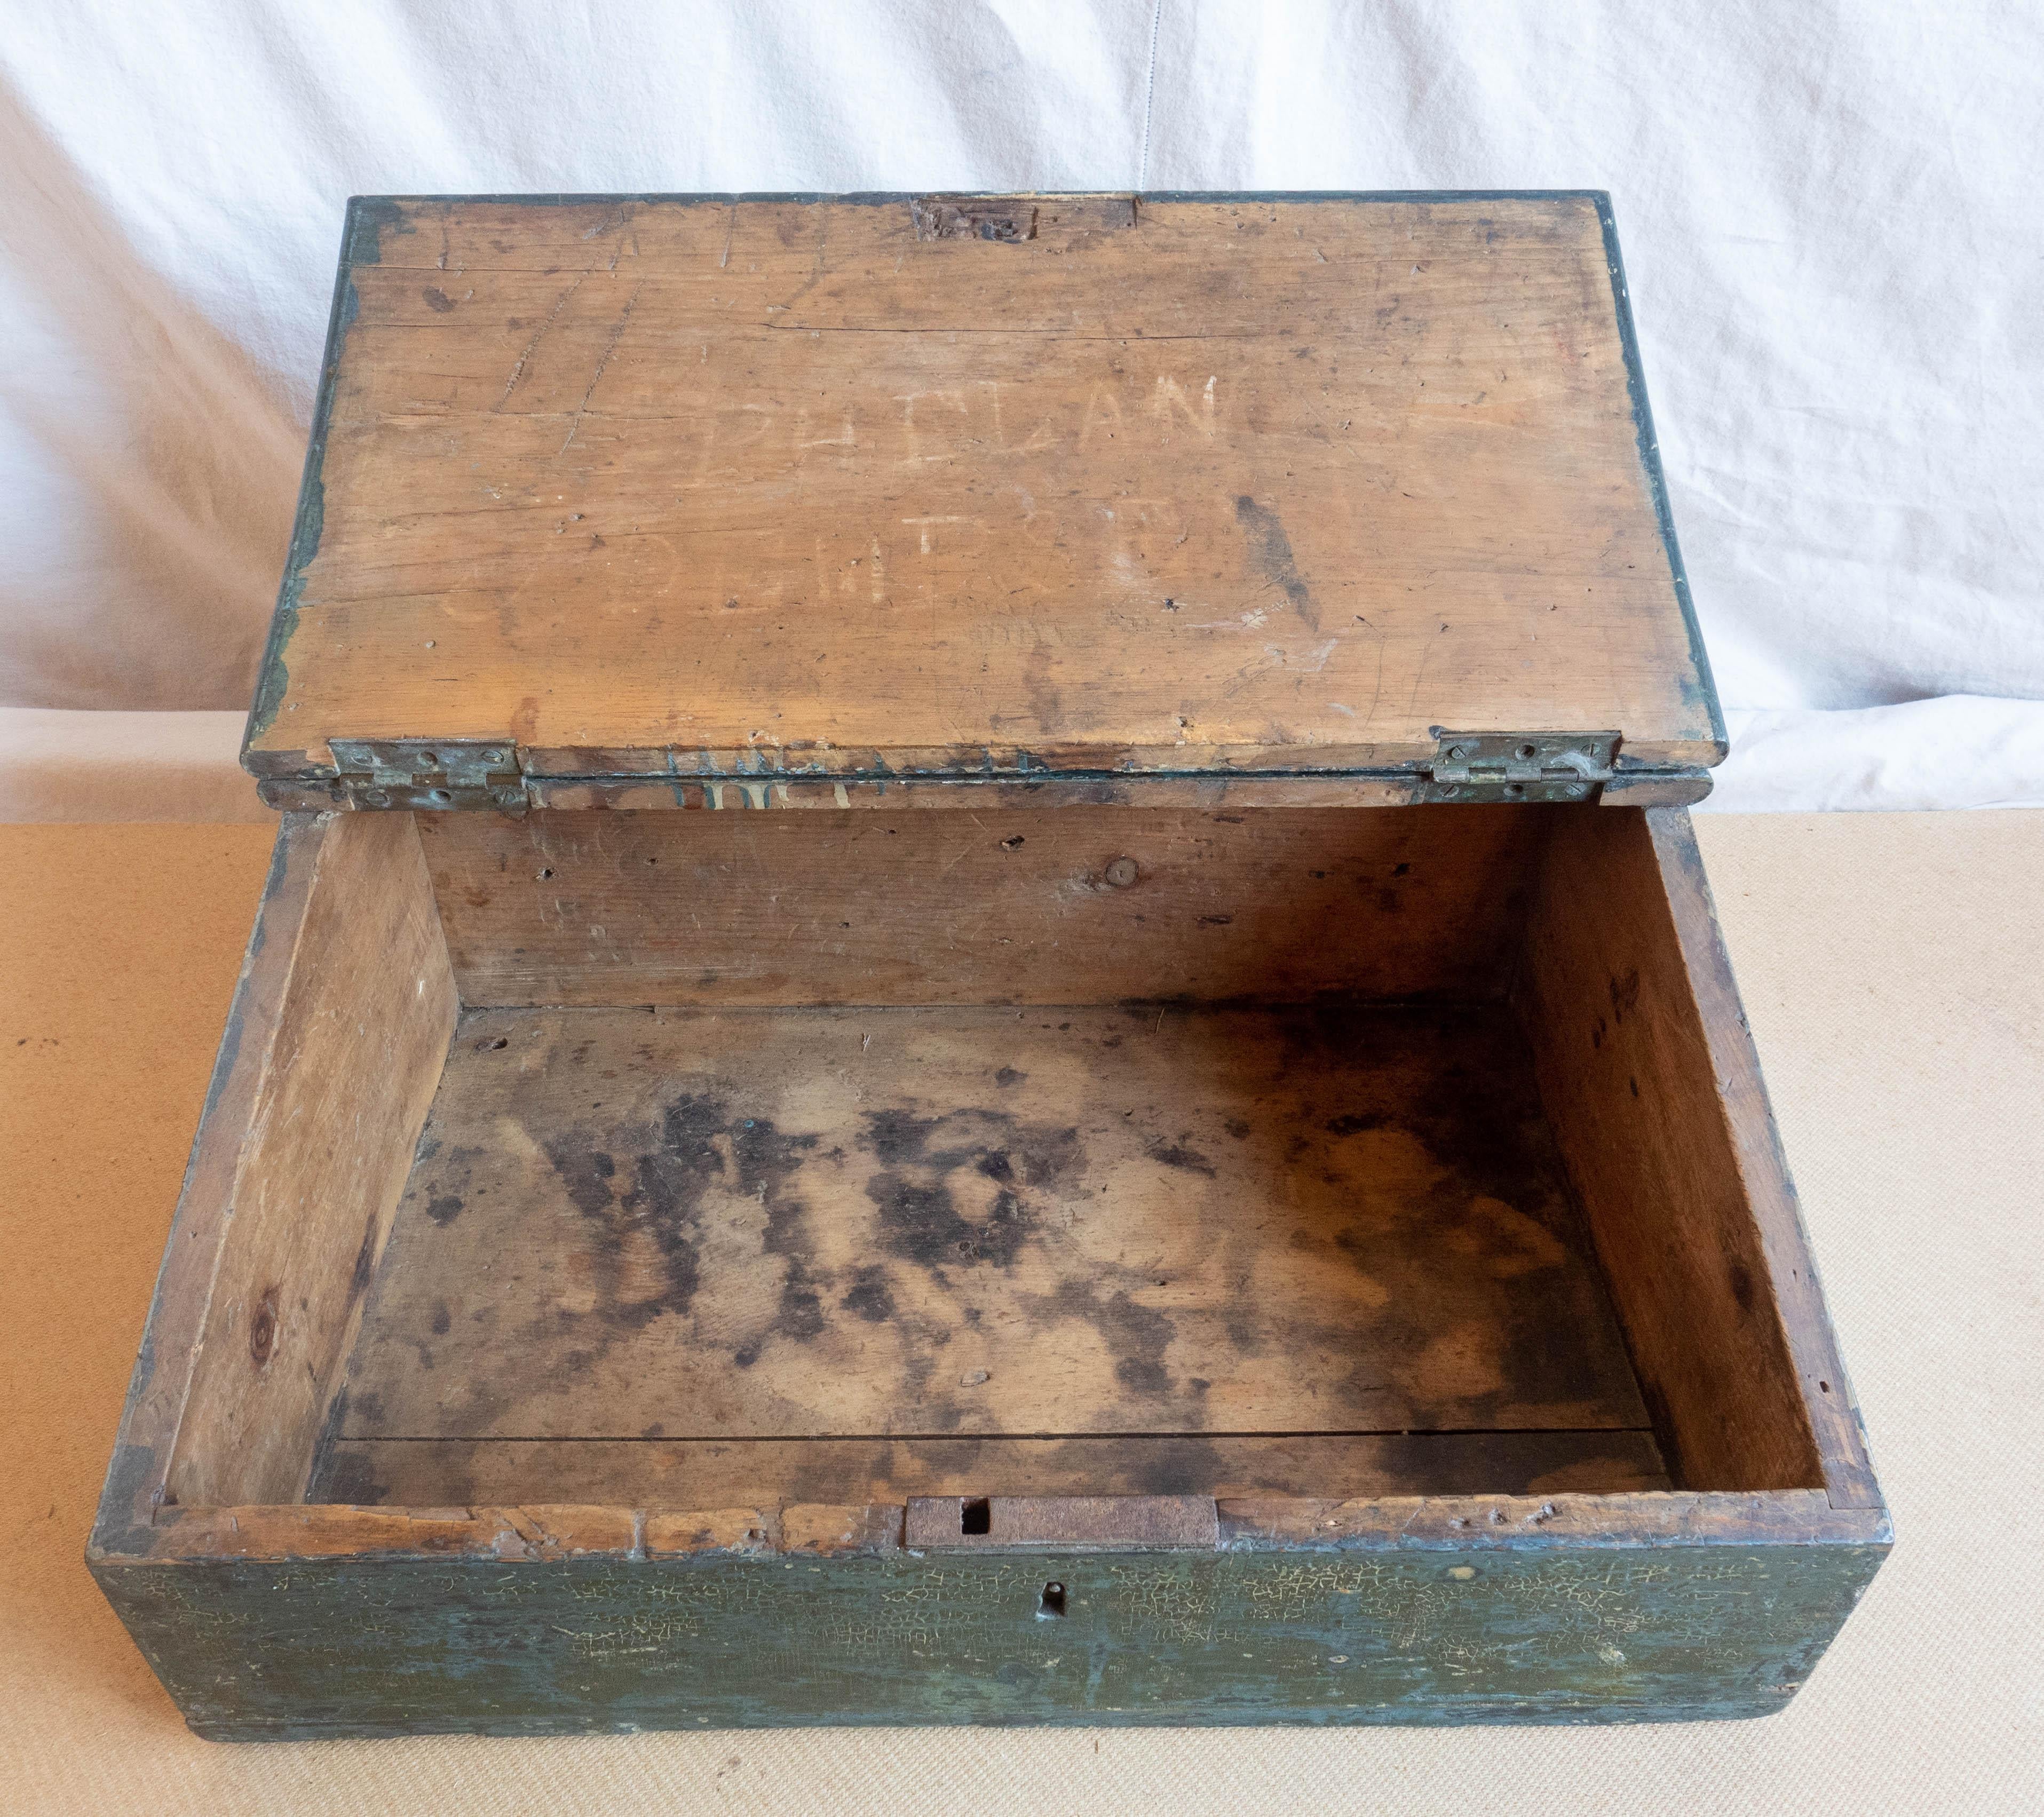 American Colonial 18th Century James Walter Folger Slant Top Desk Box from Nantucket